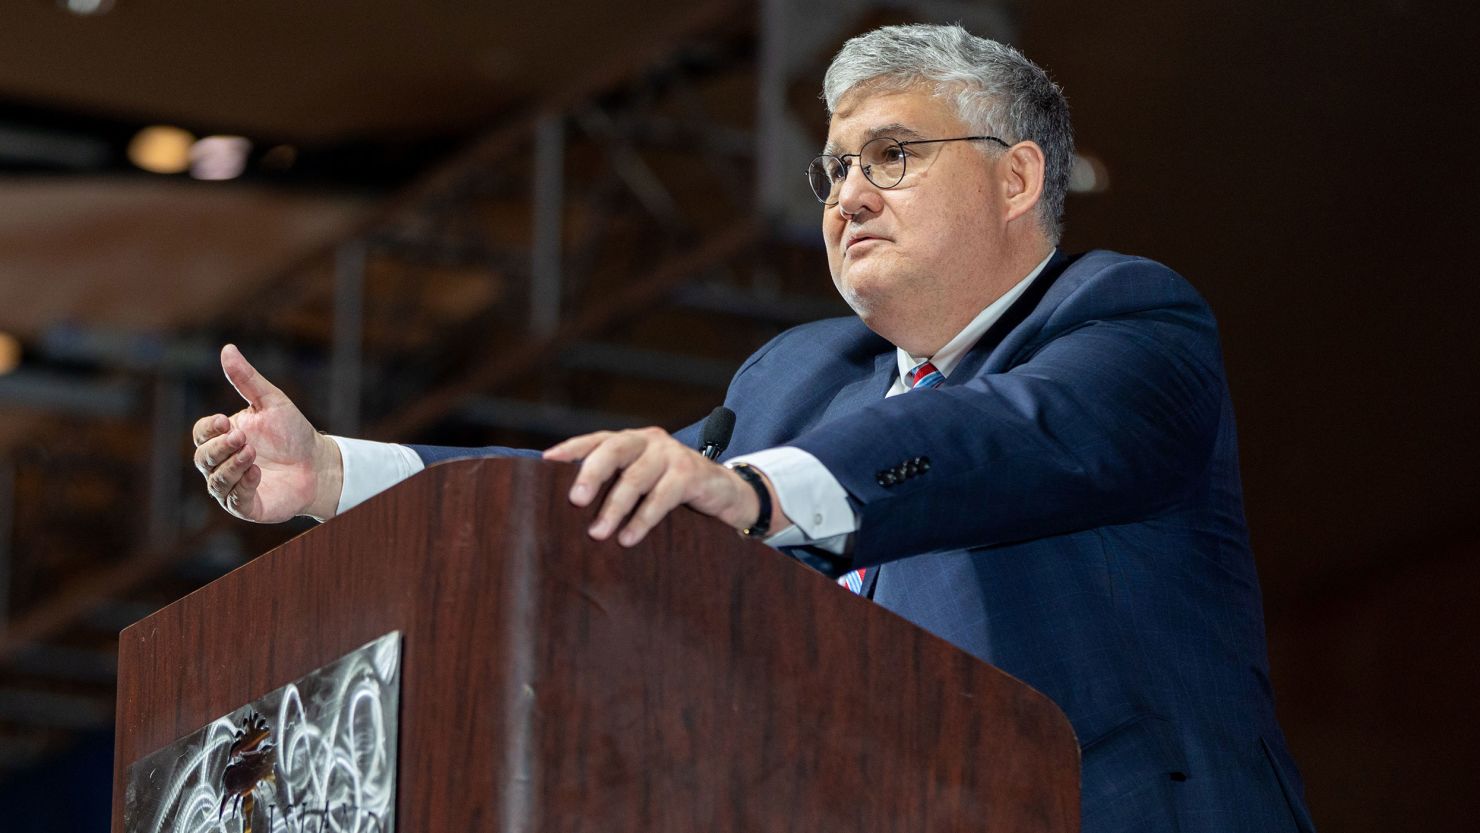 Chairman David Shafer speaks before his election at the Georgia GOP State Convention in Jekyll Island, Georgia on June 5, 2021.